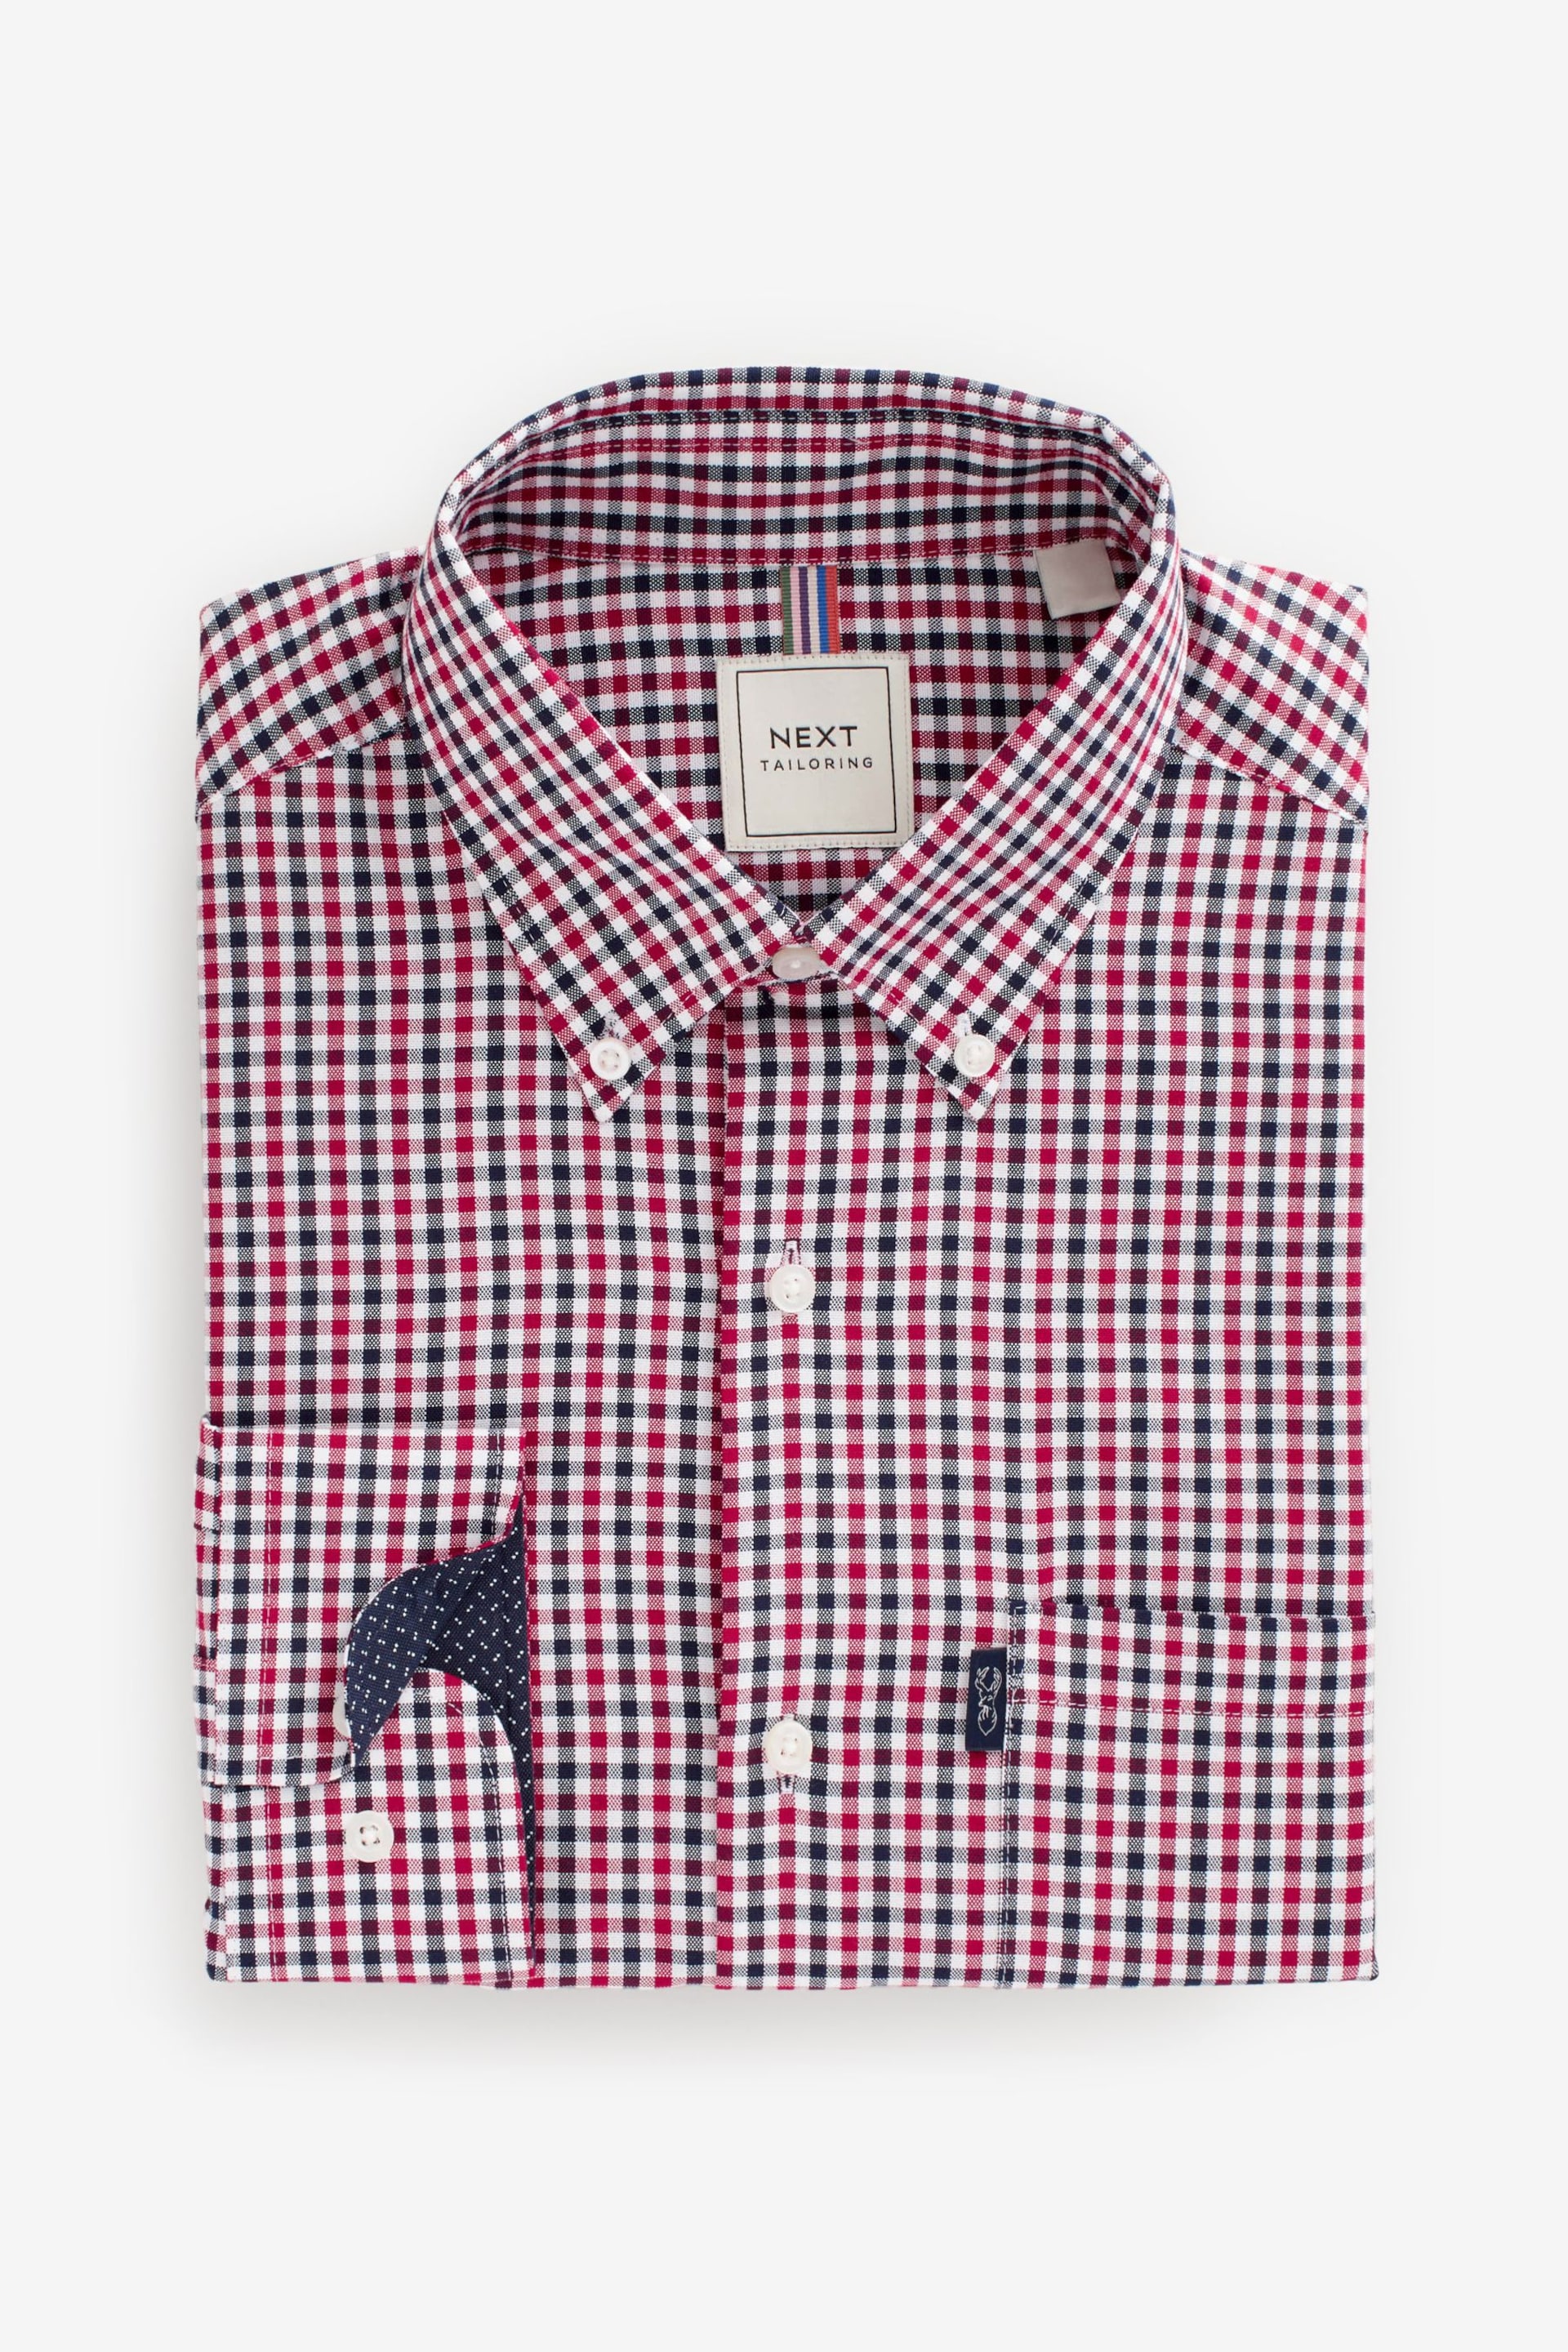 Red Gingham Easy Iron Button Down Oxford Shirt - Image 6 of 8